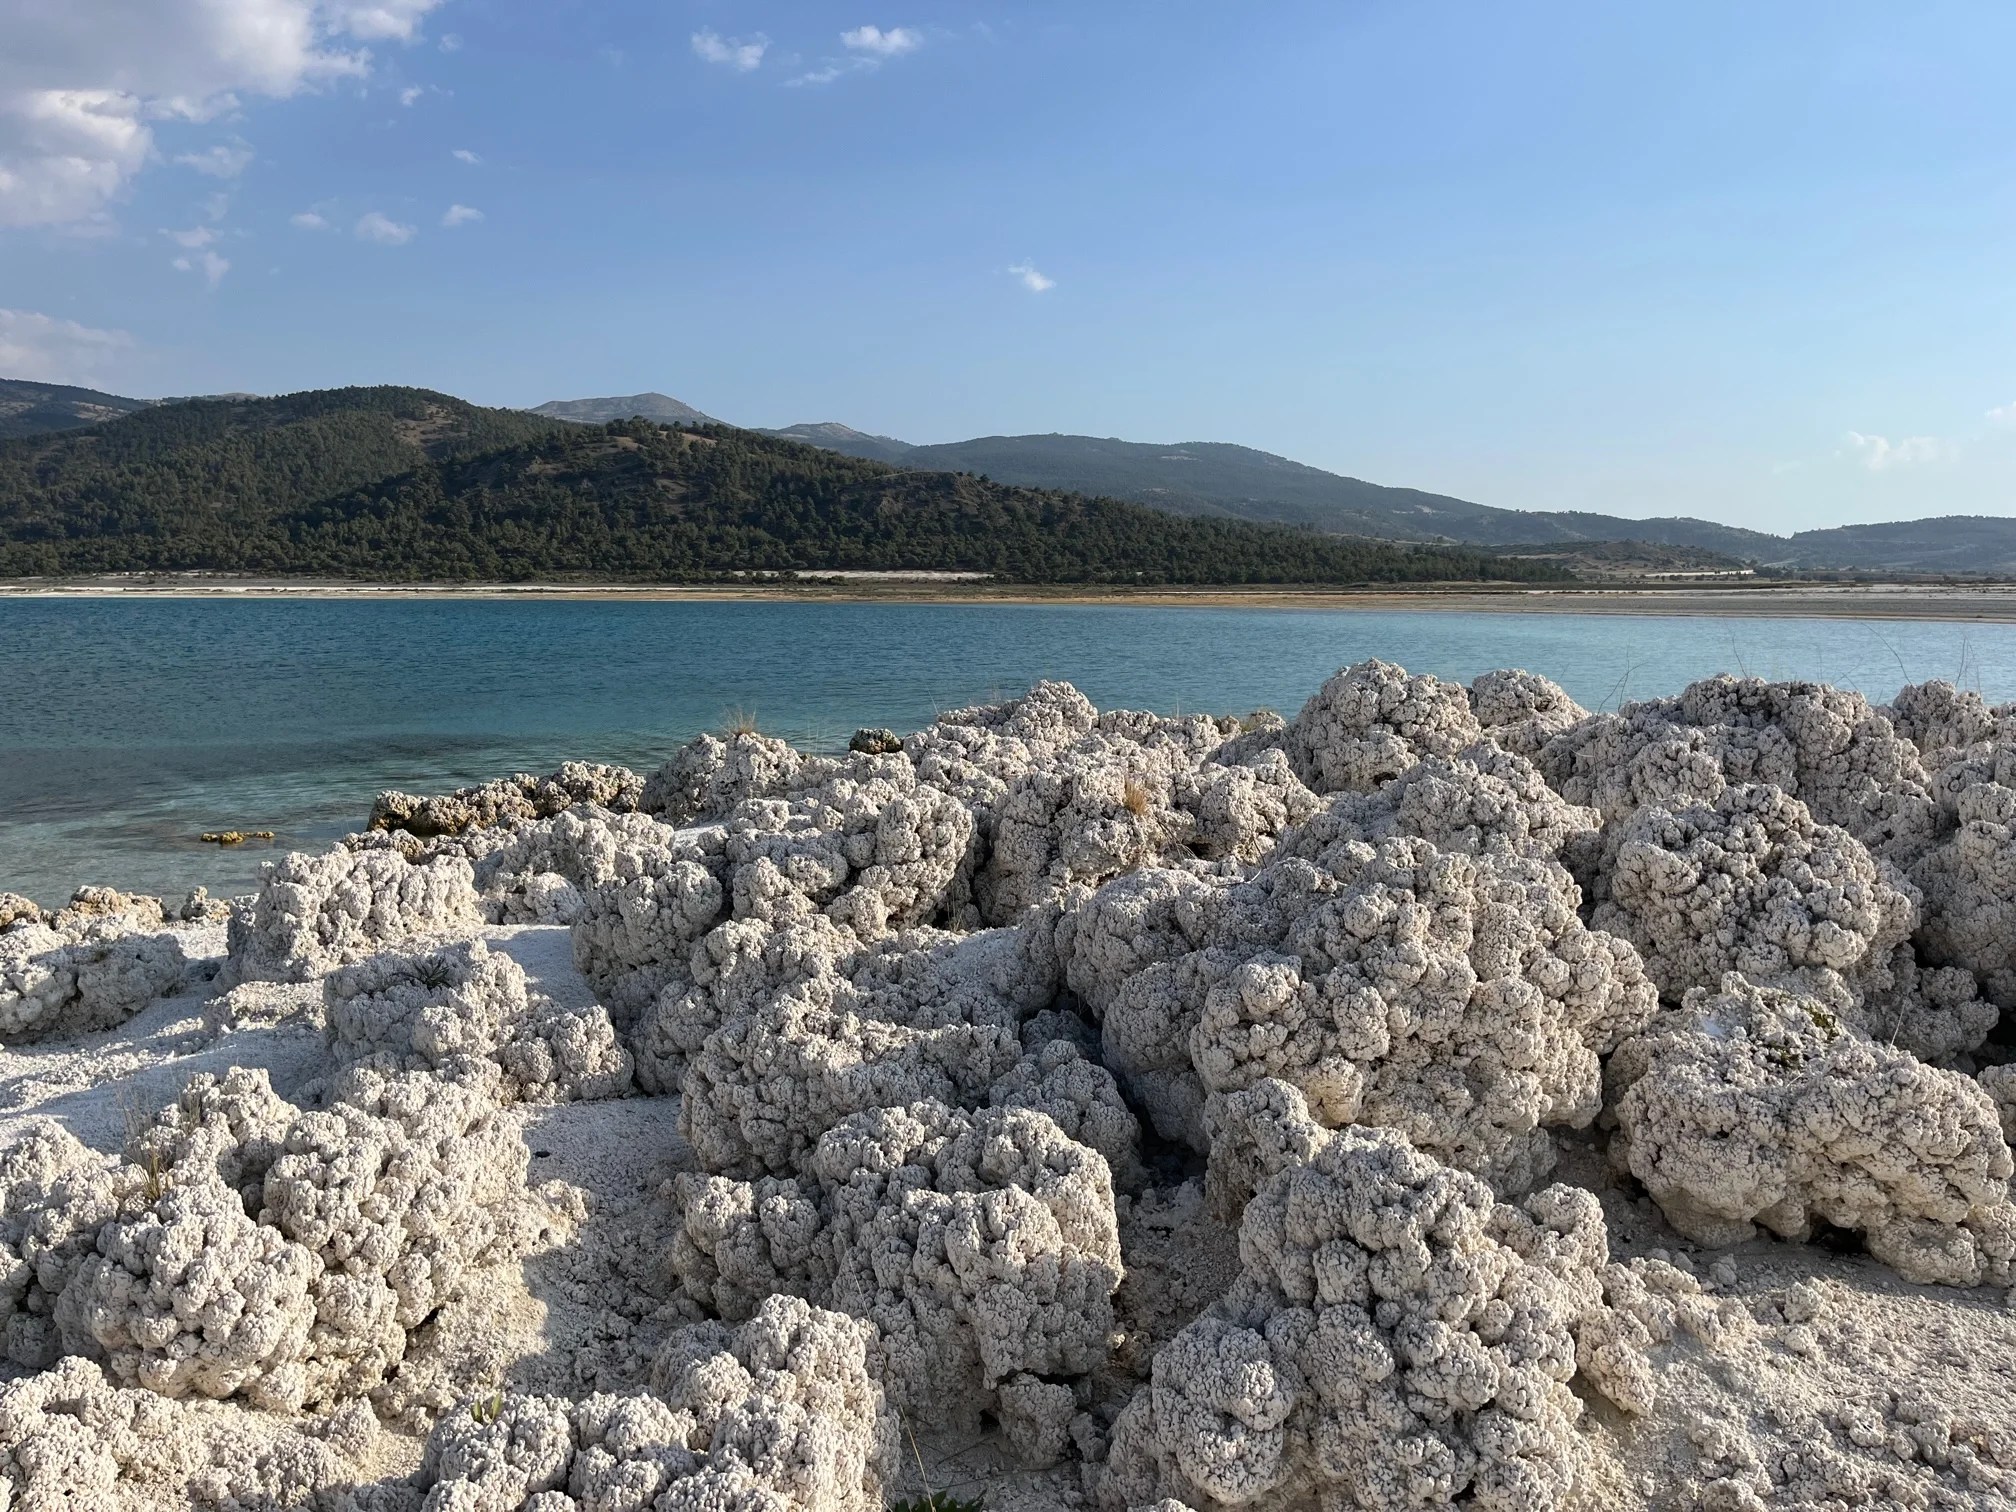 Dried up microbial structures are seen on the shore of the clear blue waters of a lake. The structures are bleached white in the Sun and look similar to brain-like coral.